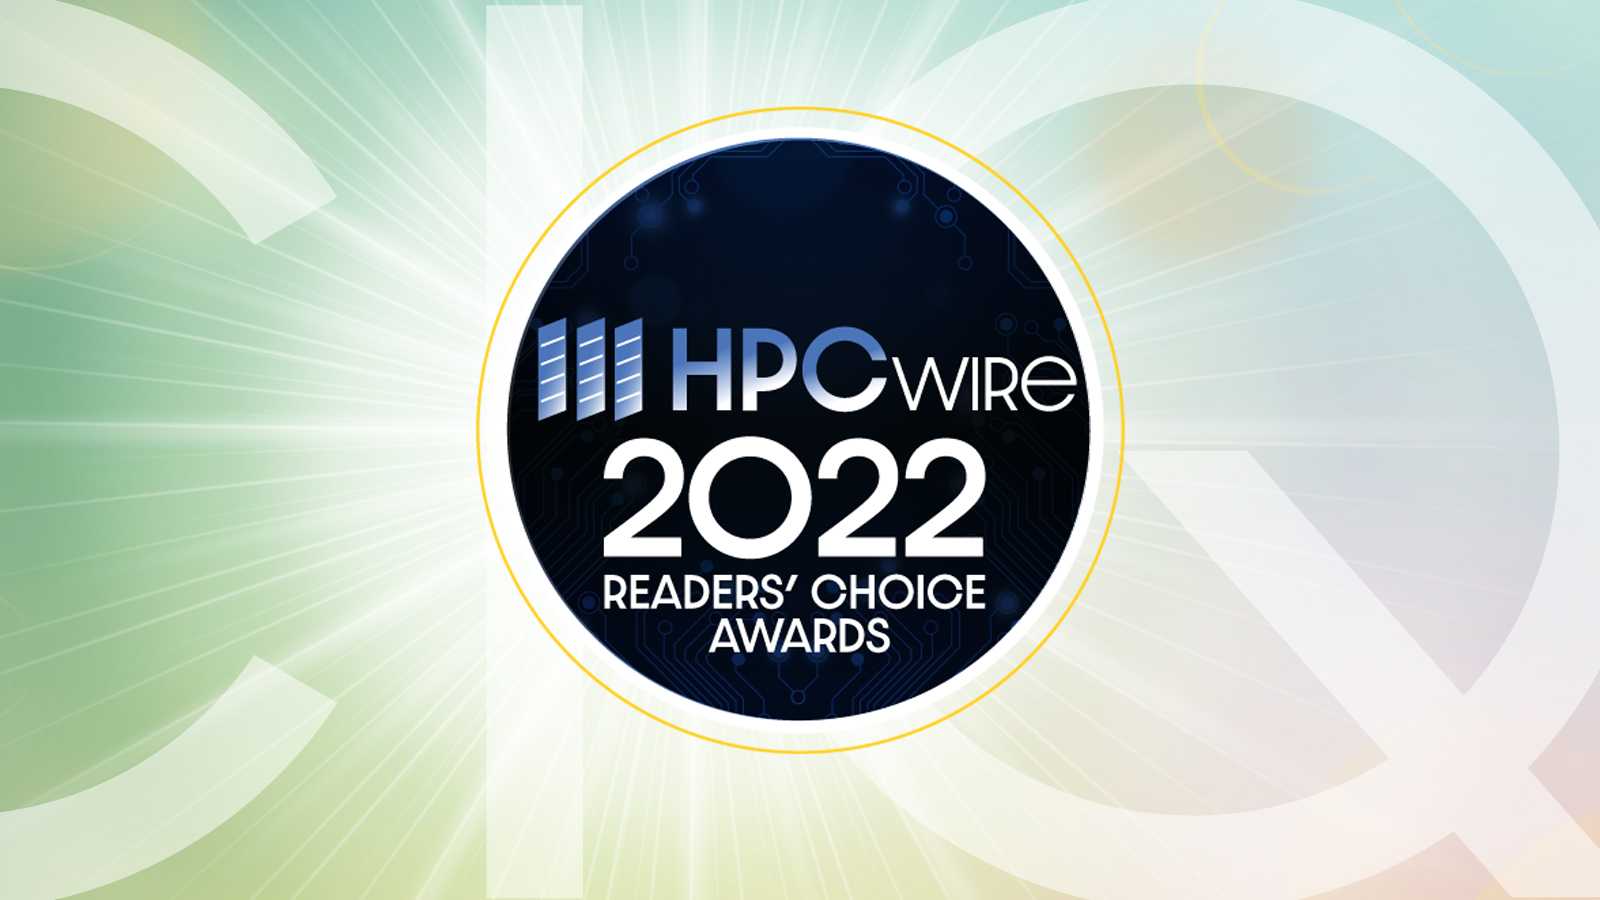 Rocky Linux and Apptainer Receive HPCwire Readers' Choice Awards